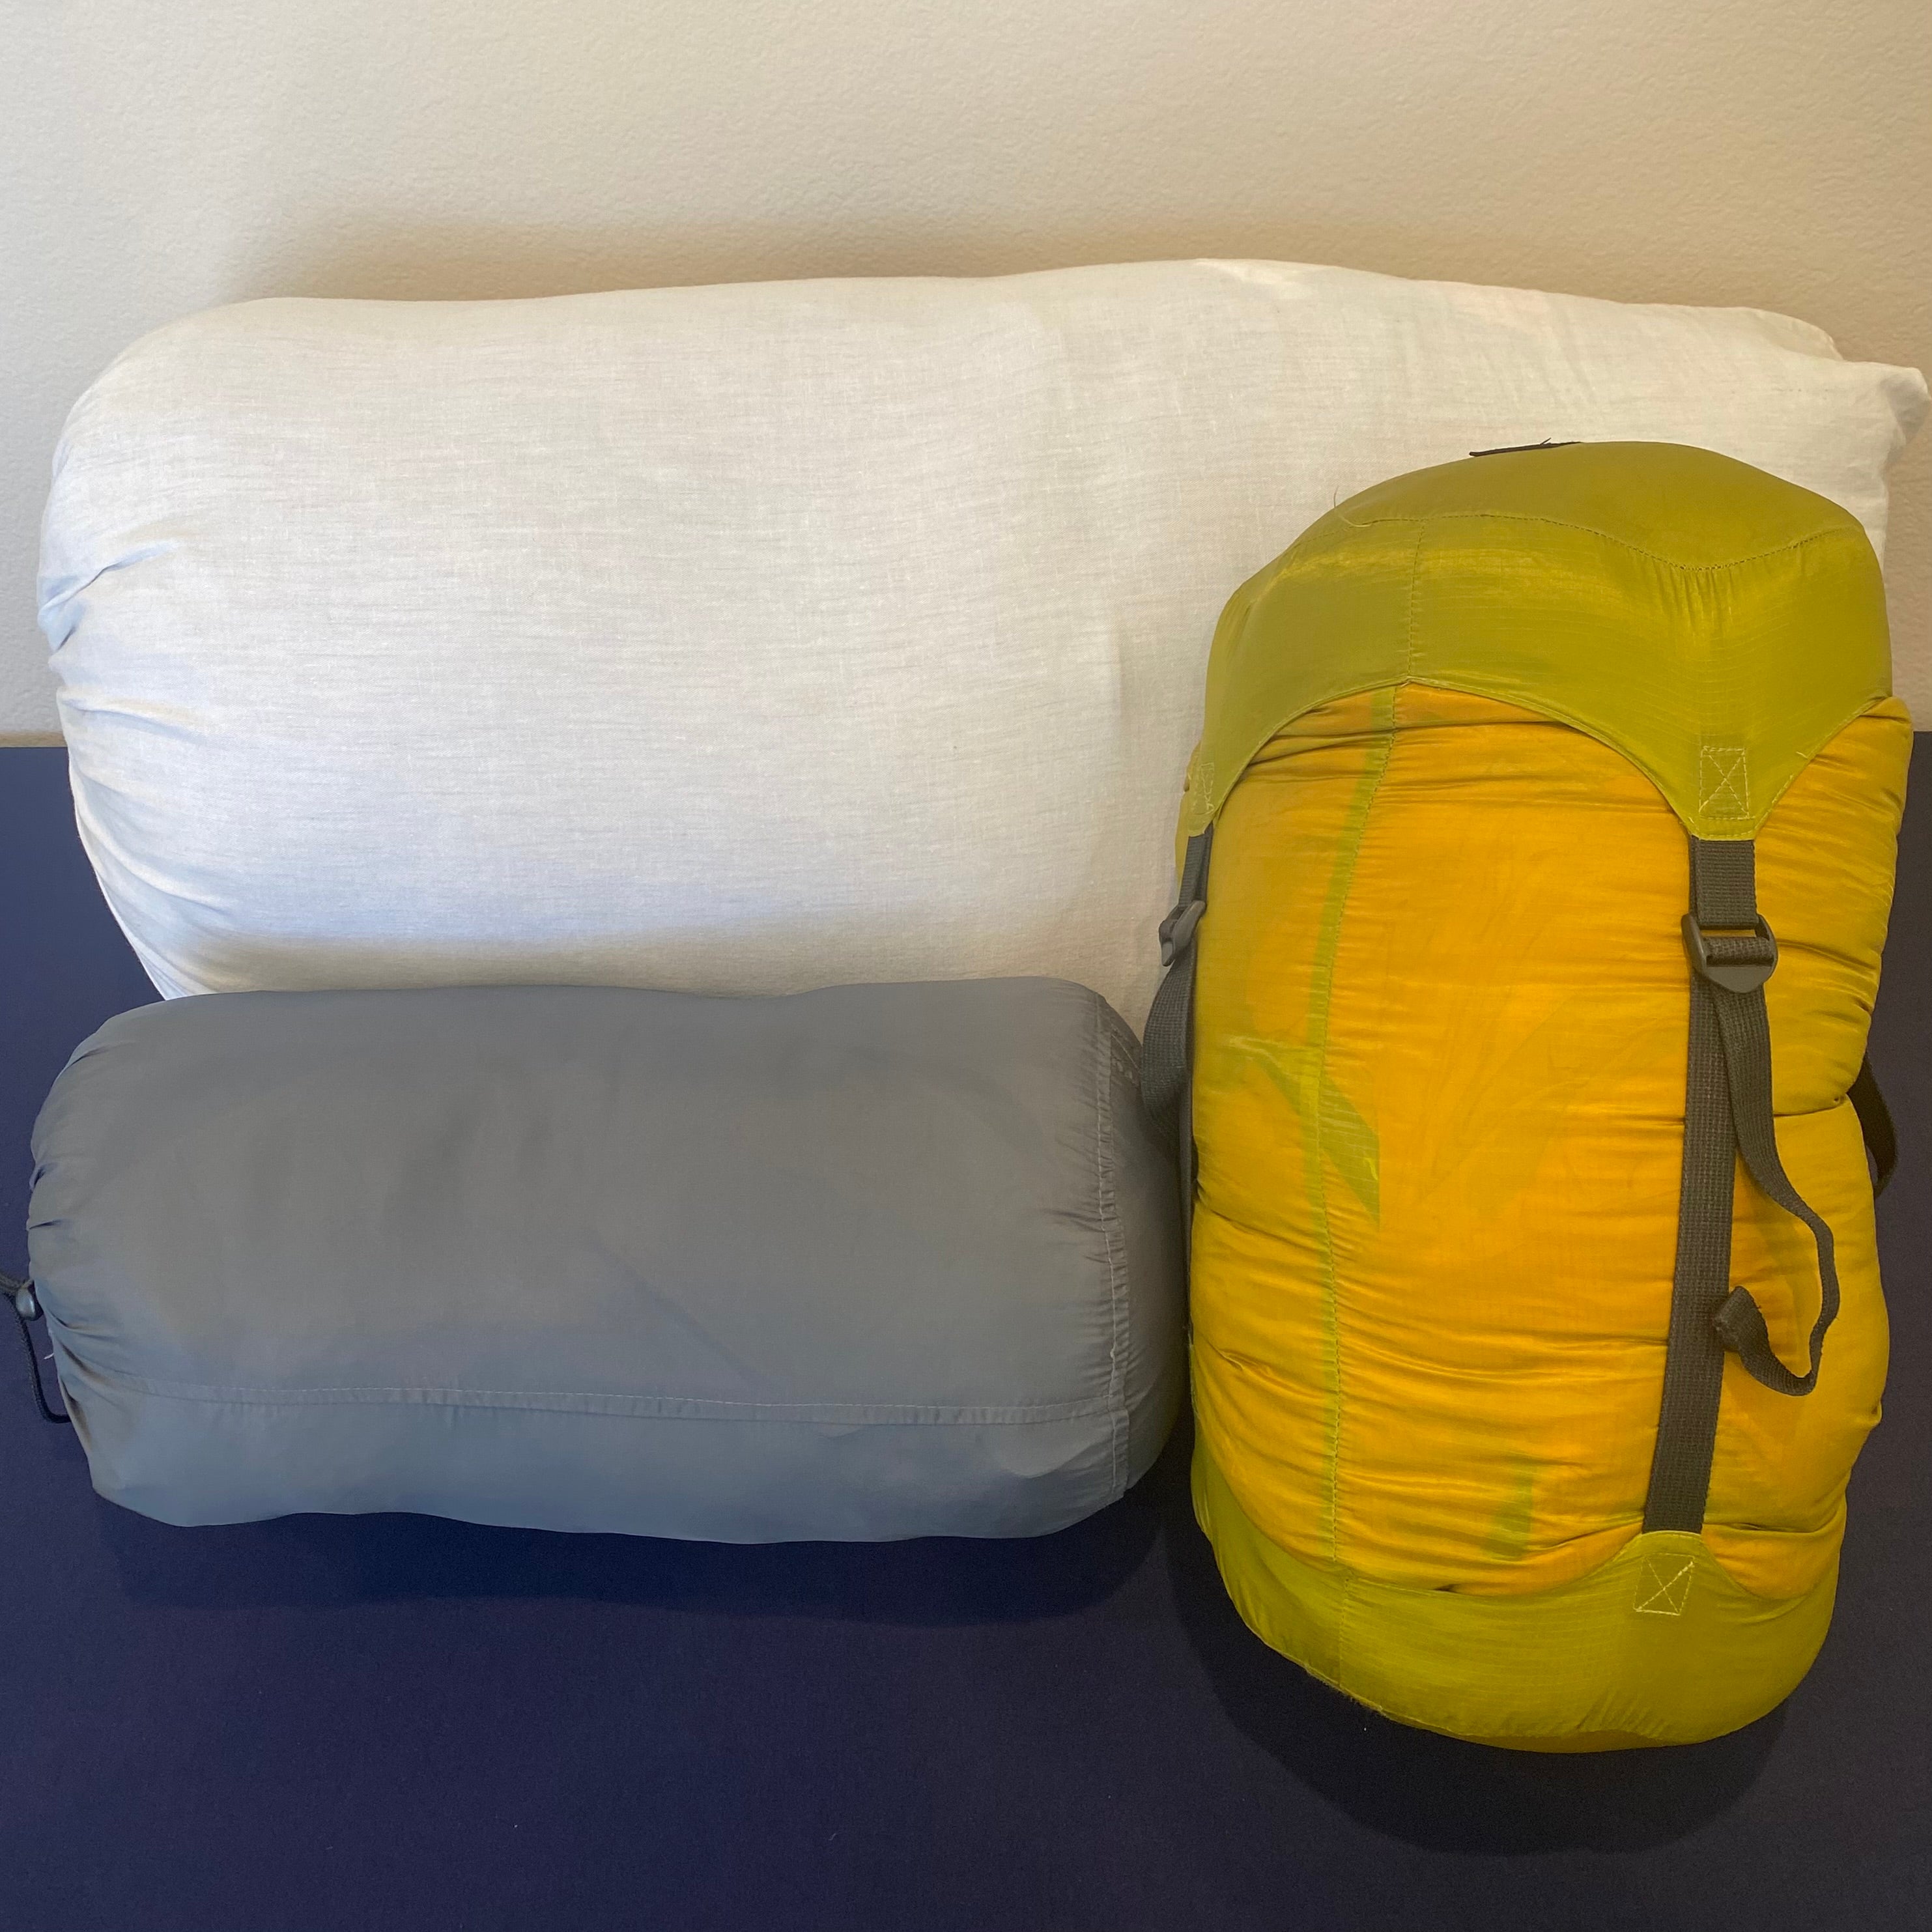 Caring for Your Sleeping Bag